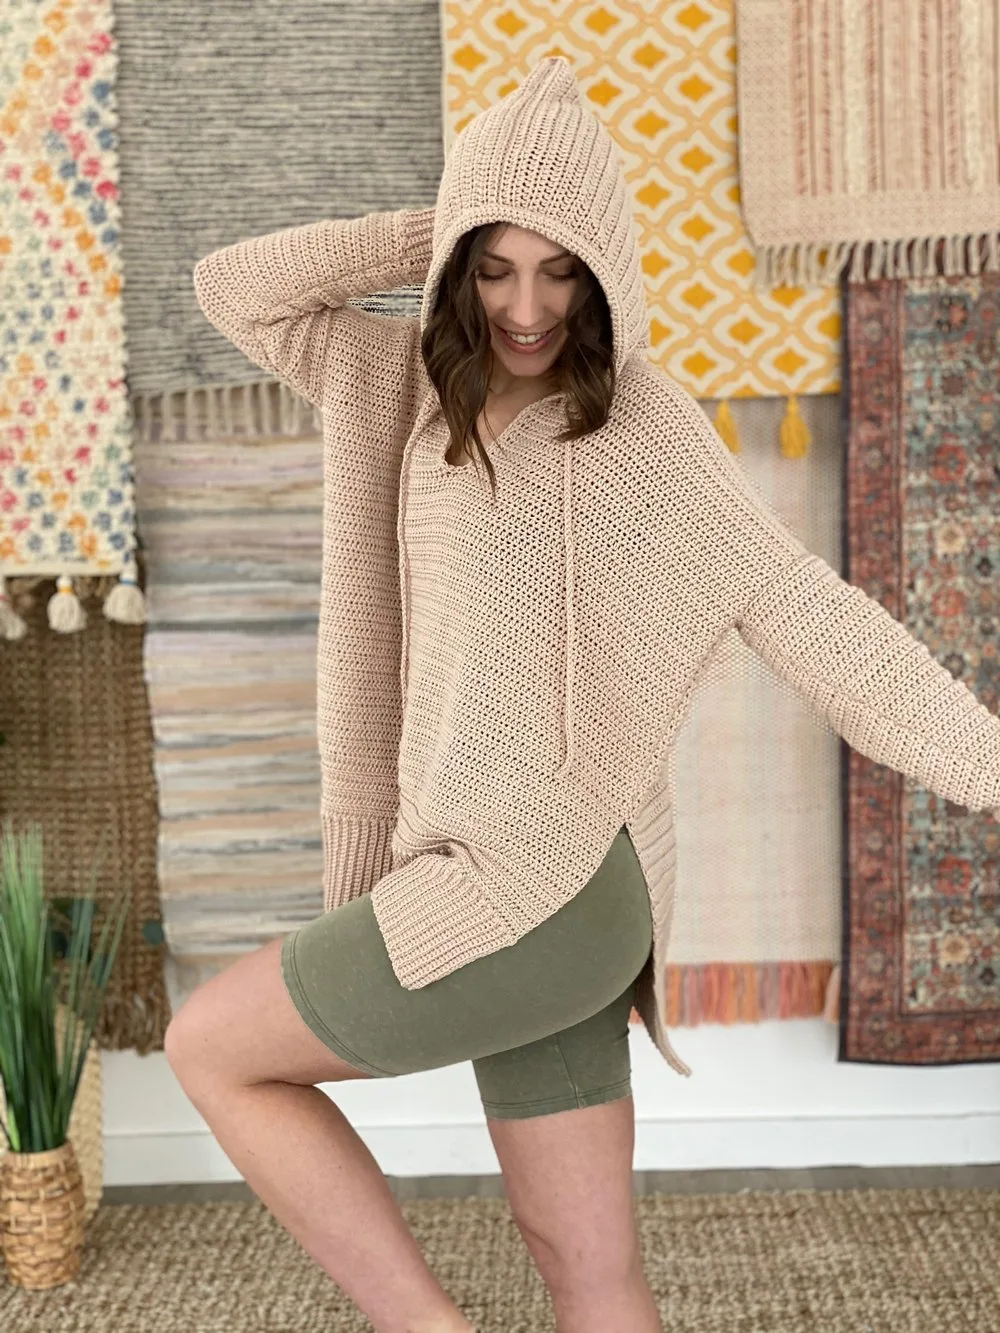 9 Cozy Crochet Hoodie Patterns to Make for Fall - I Can Crochet That